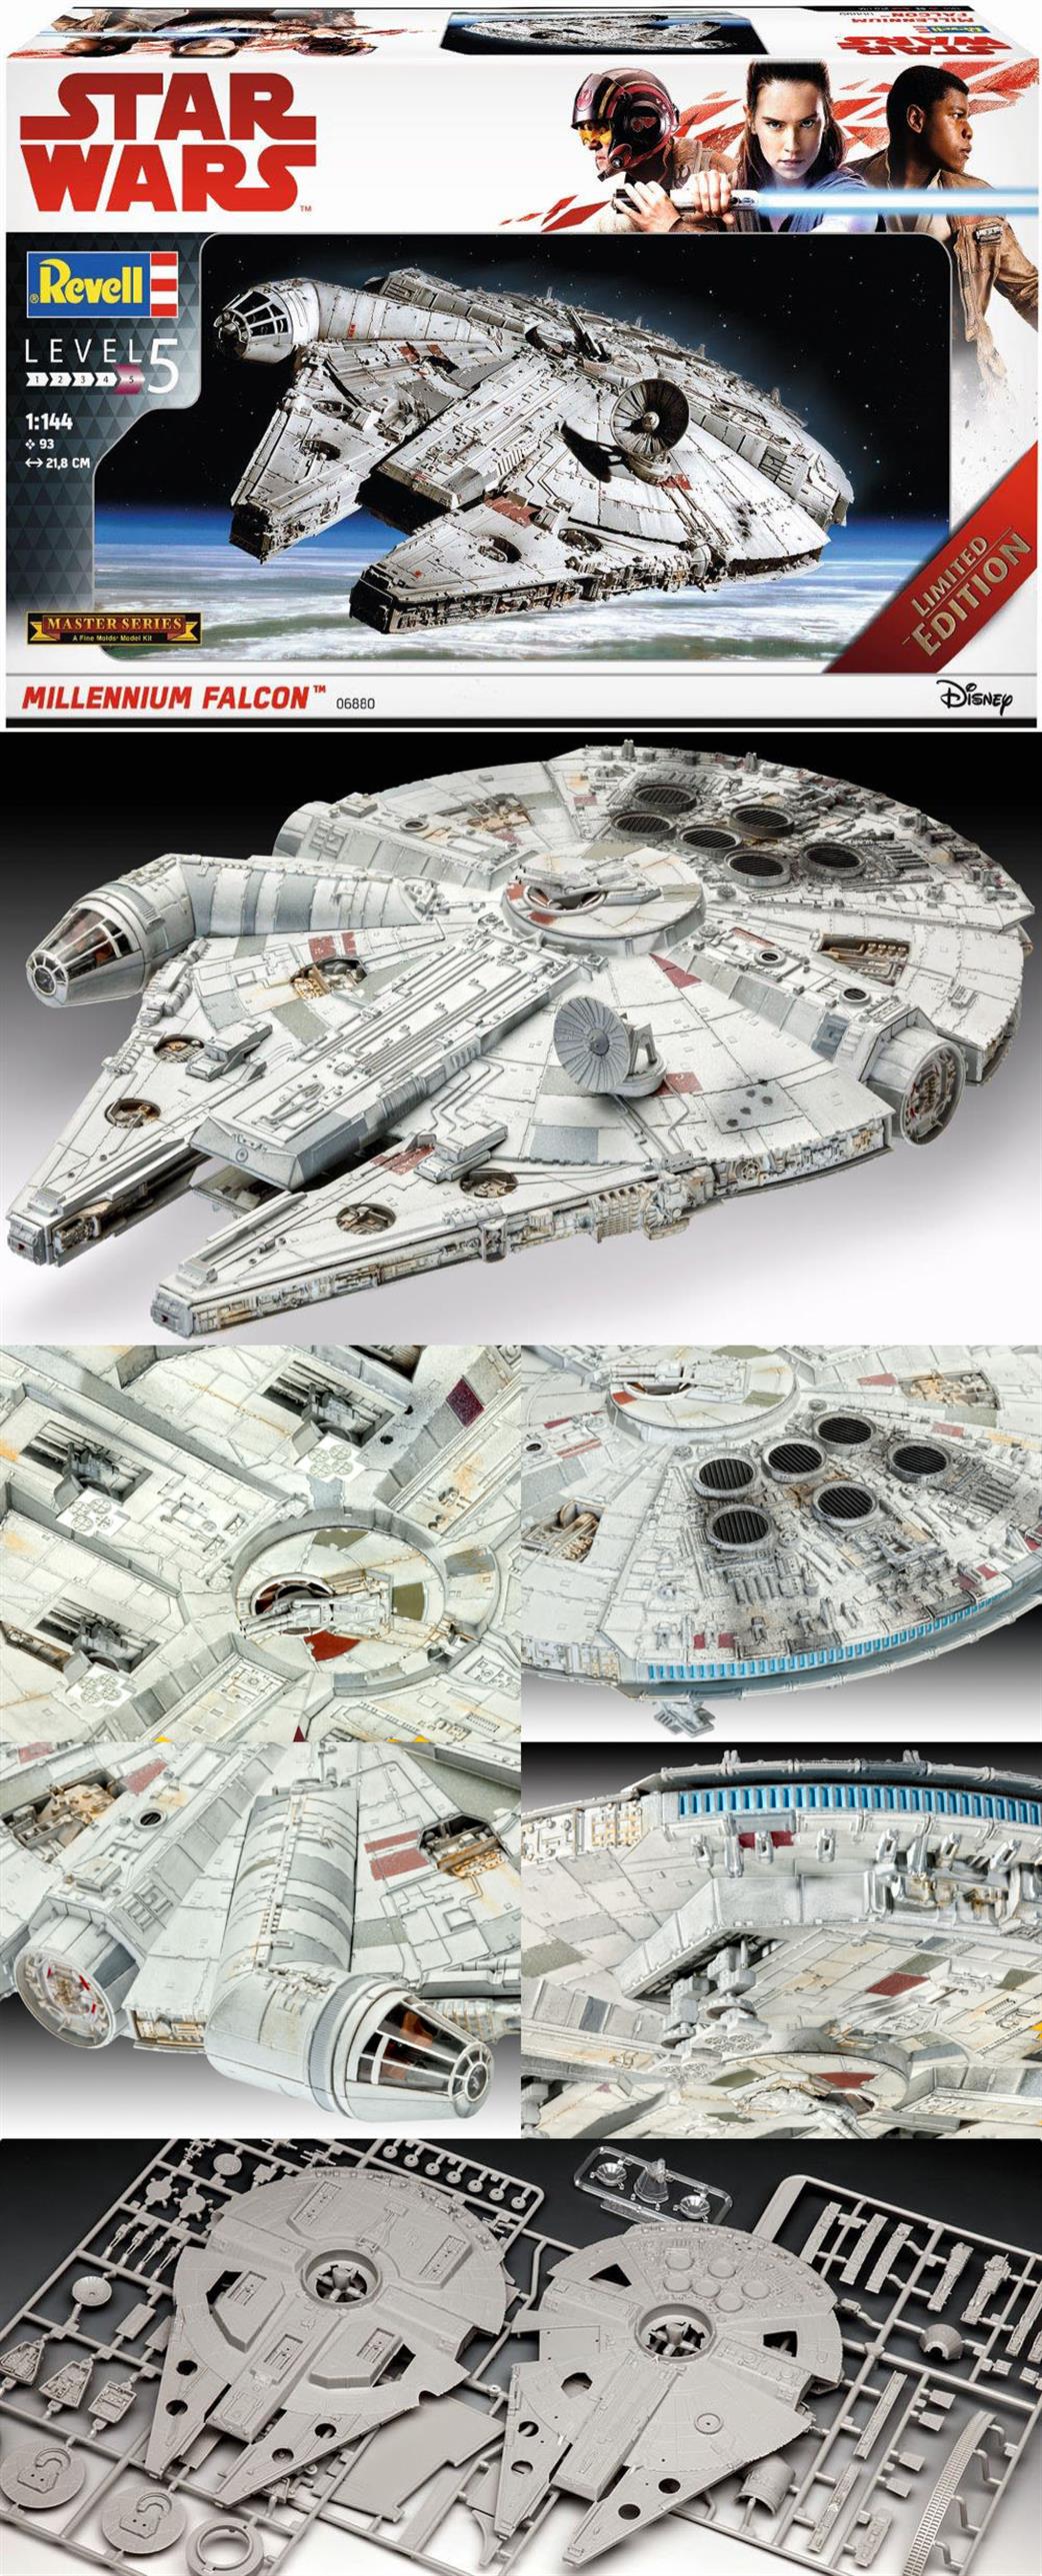 Revell 1/144 06880 Millennium Falcon from Star Wars